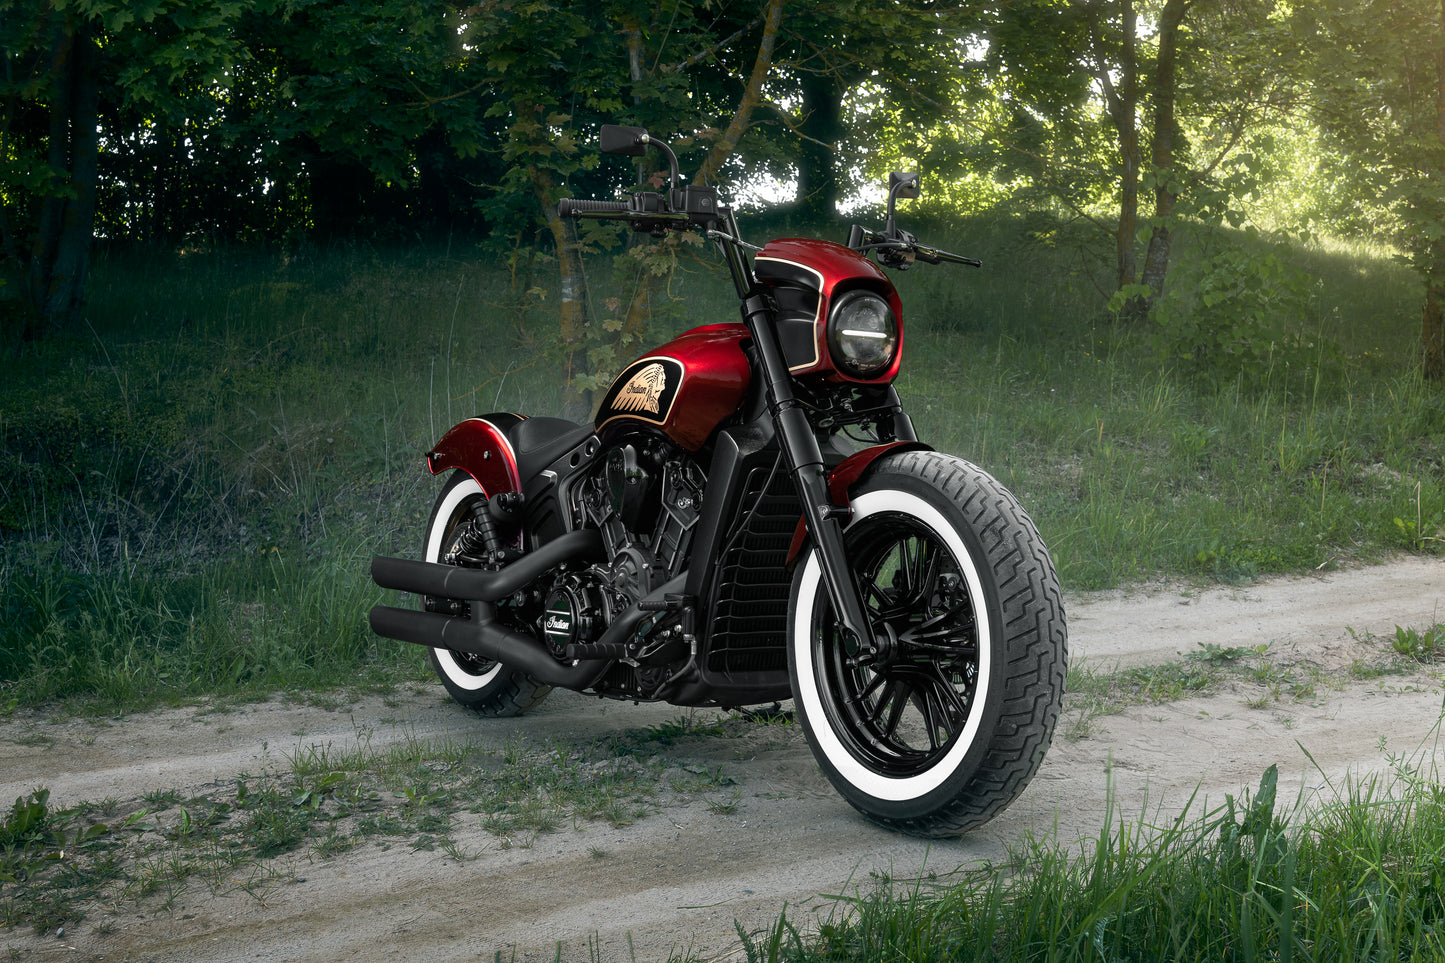 Harley Davidson motorcycle with Killer Custom "Tomahawk" series headlight fairing from the side in the forest